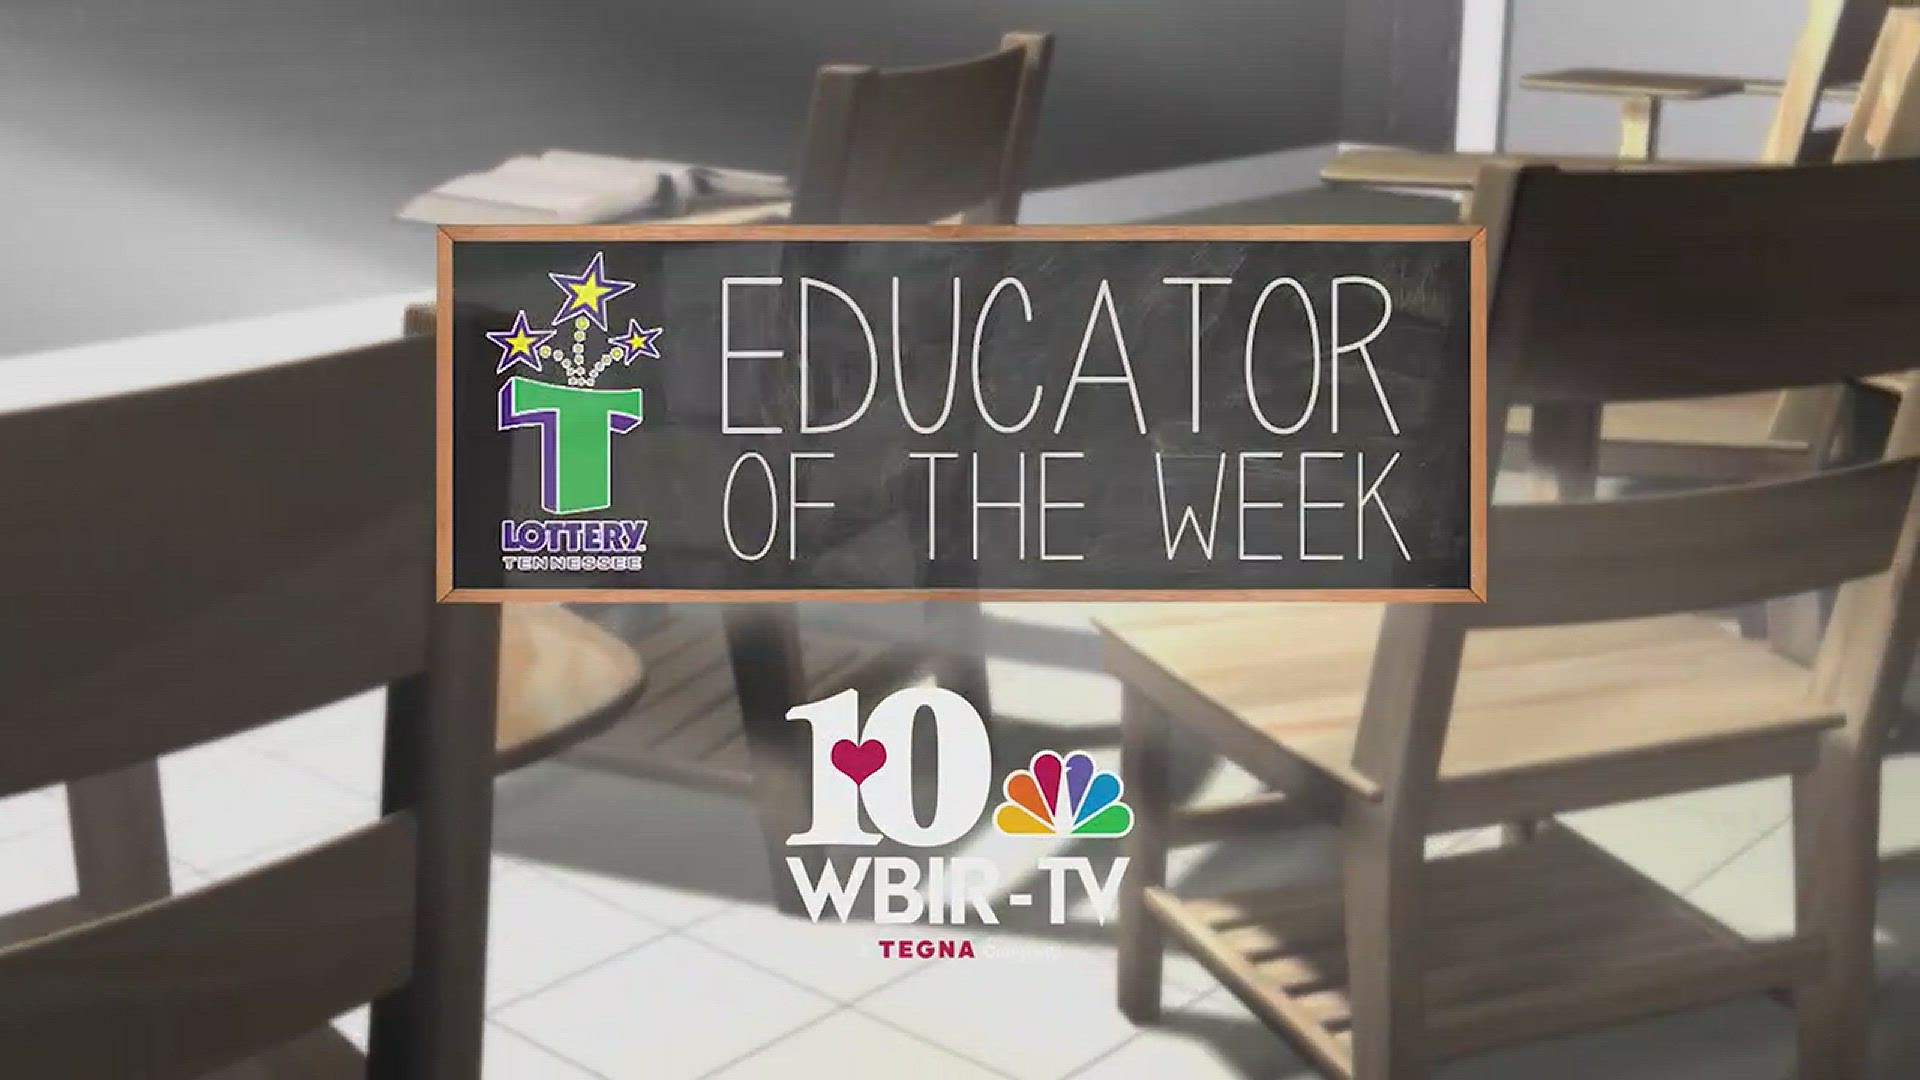 The educator of the week 9/25 is Holly Briggs